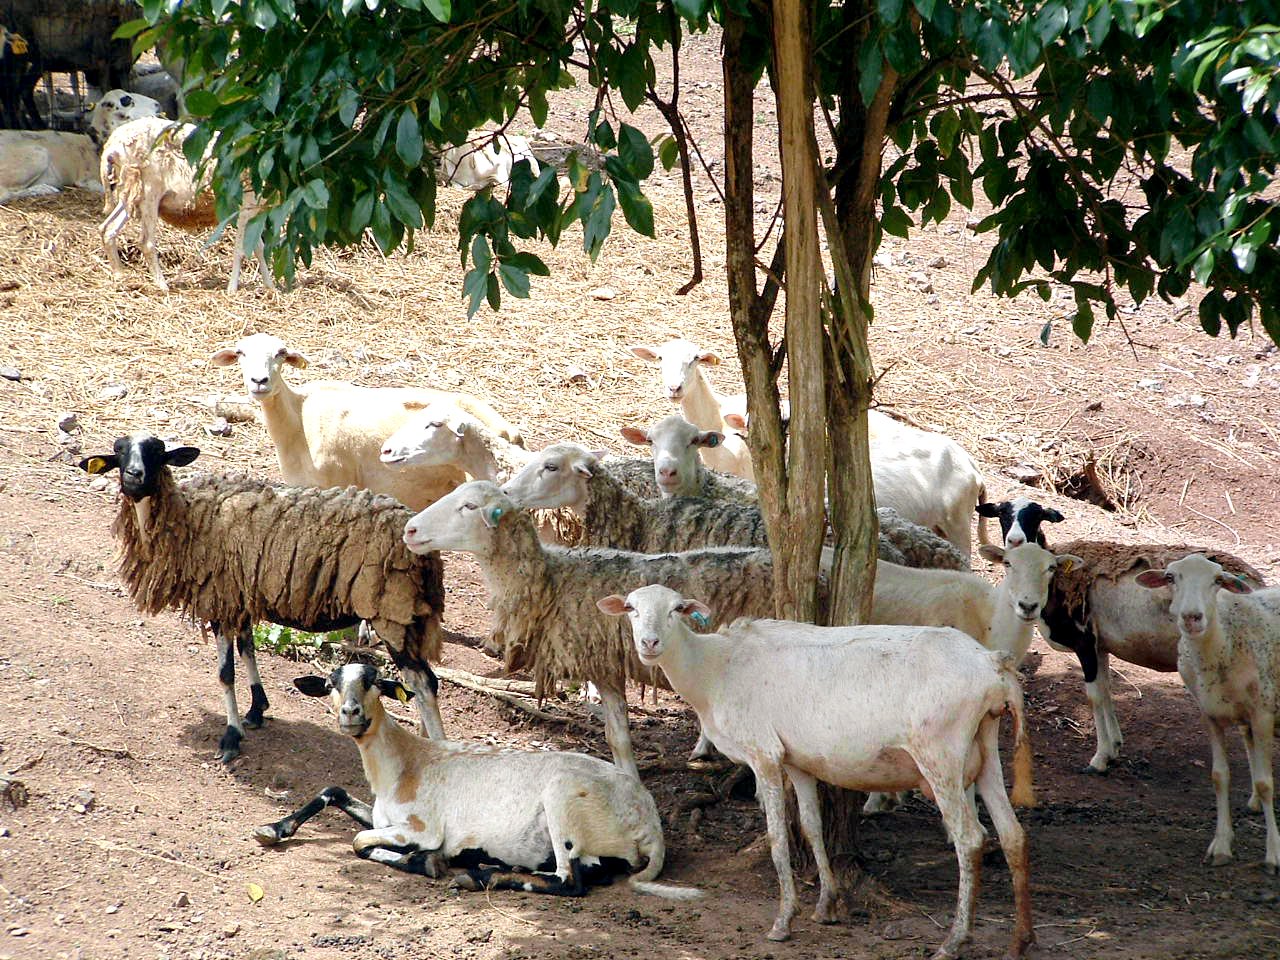 a large herd of sheep standing around next to a tree